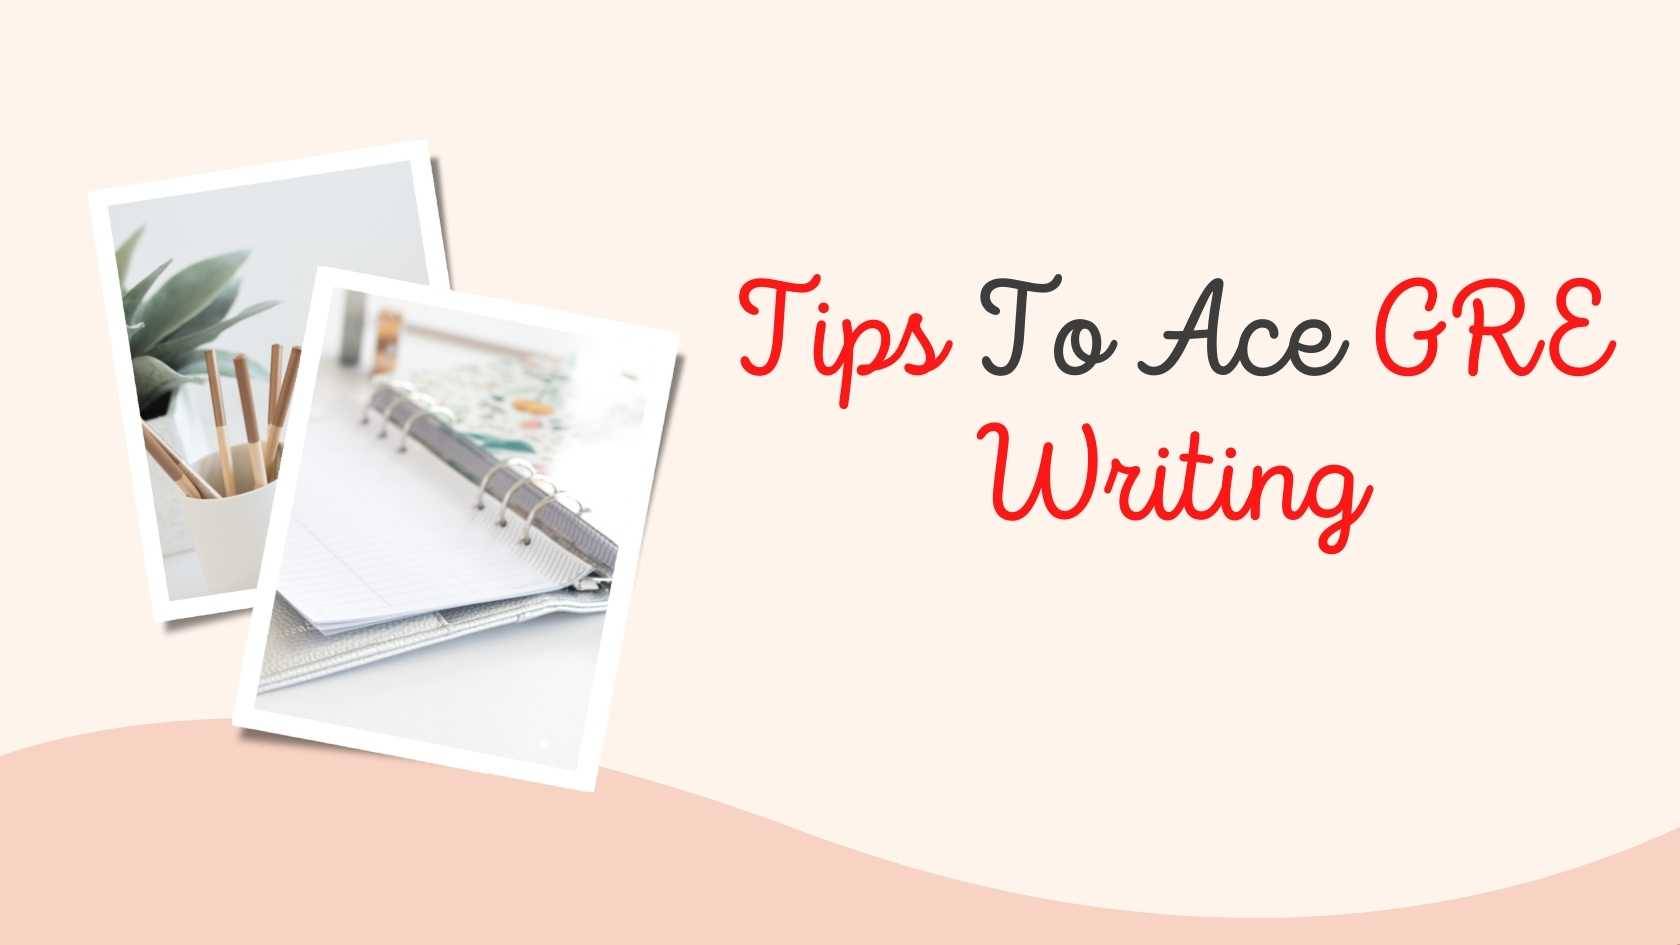 Tips to Ace GRE Writing